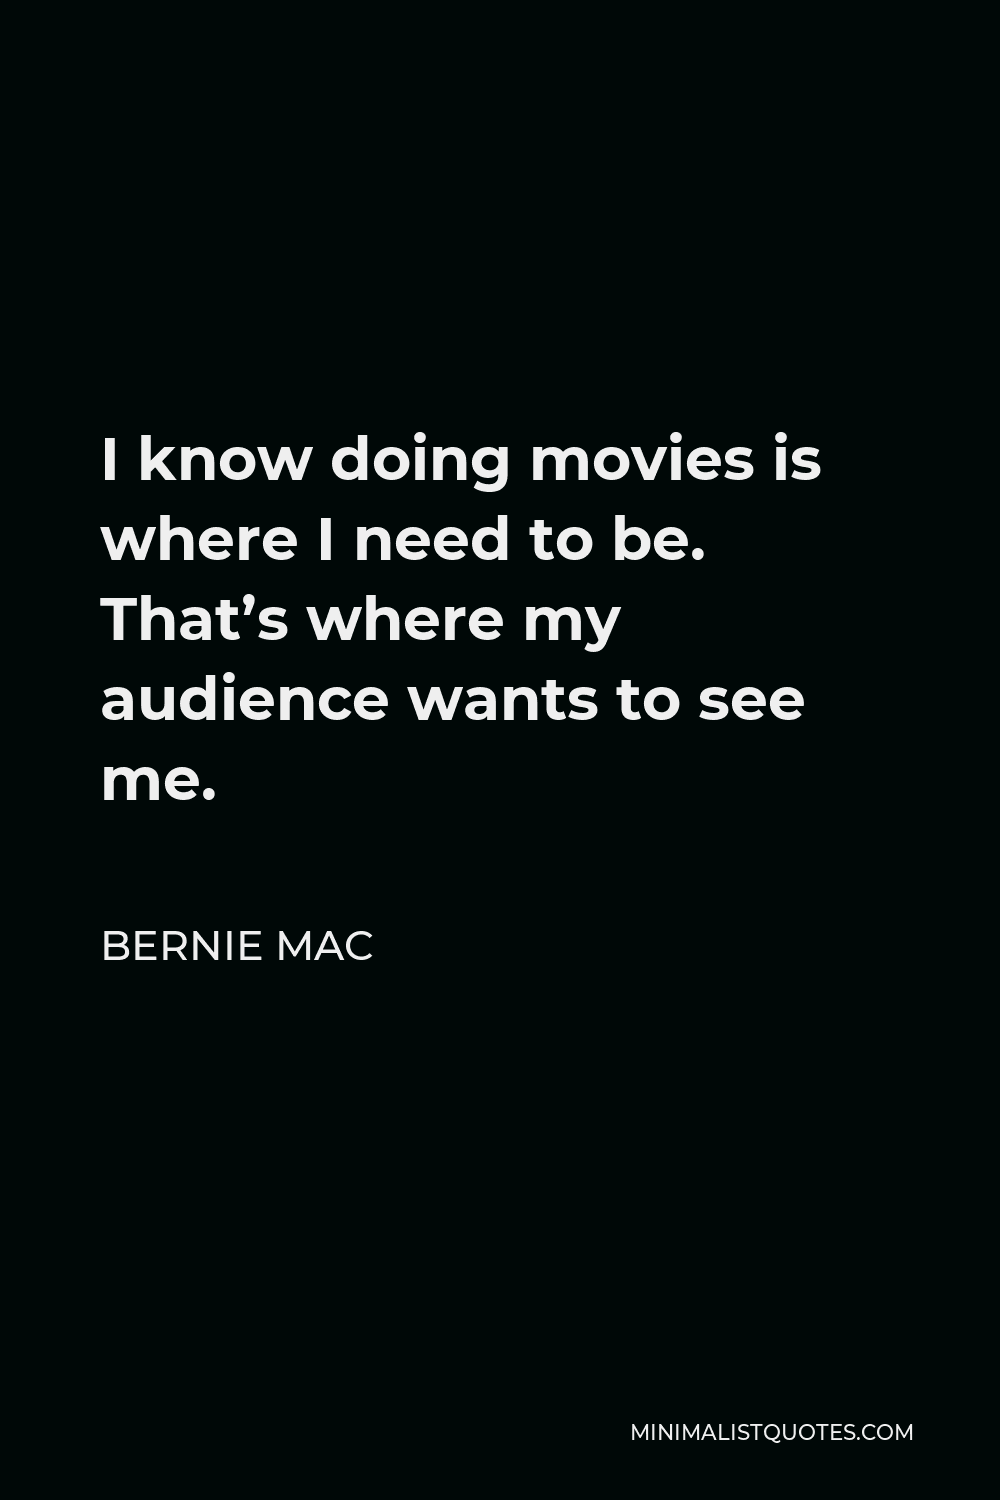 Bernie Mac Quote - I know doing movies is where I need to be. That’s where my audience wants to see me.